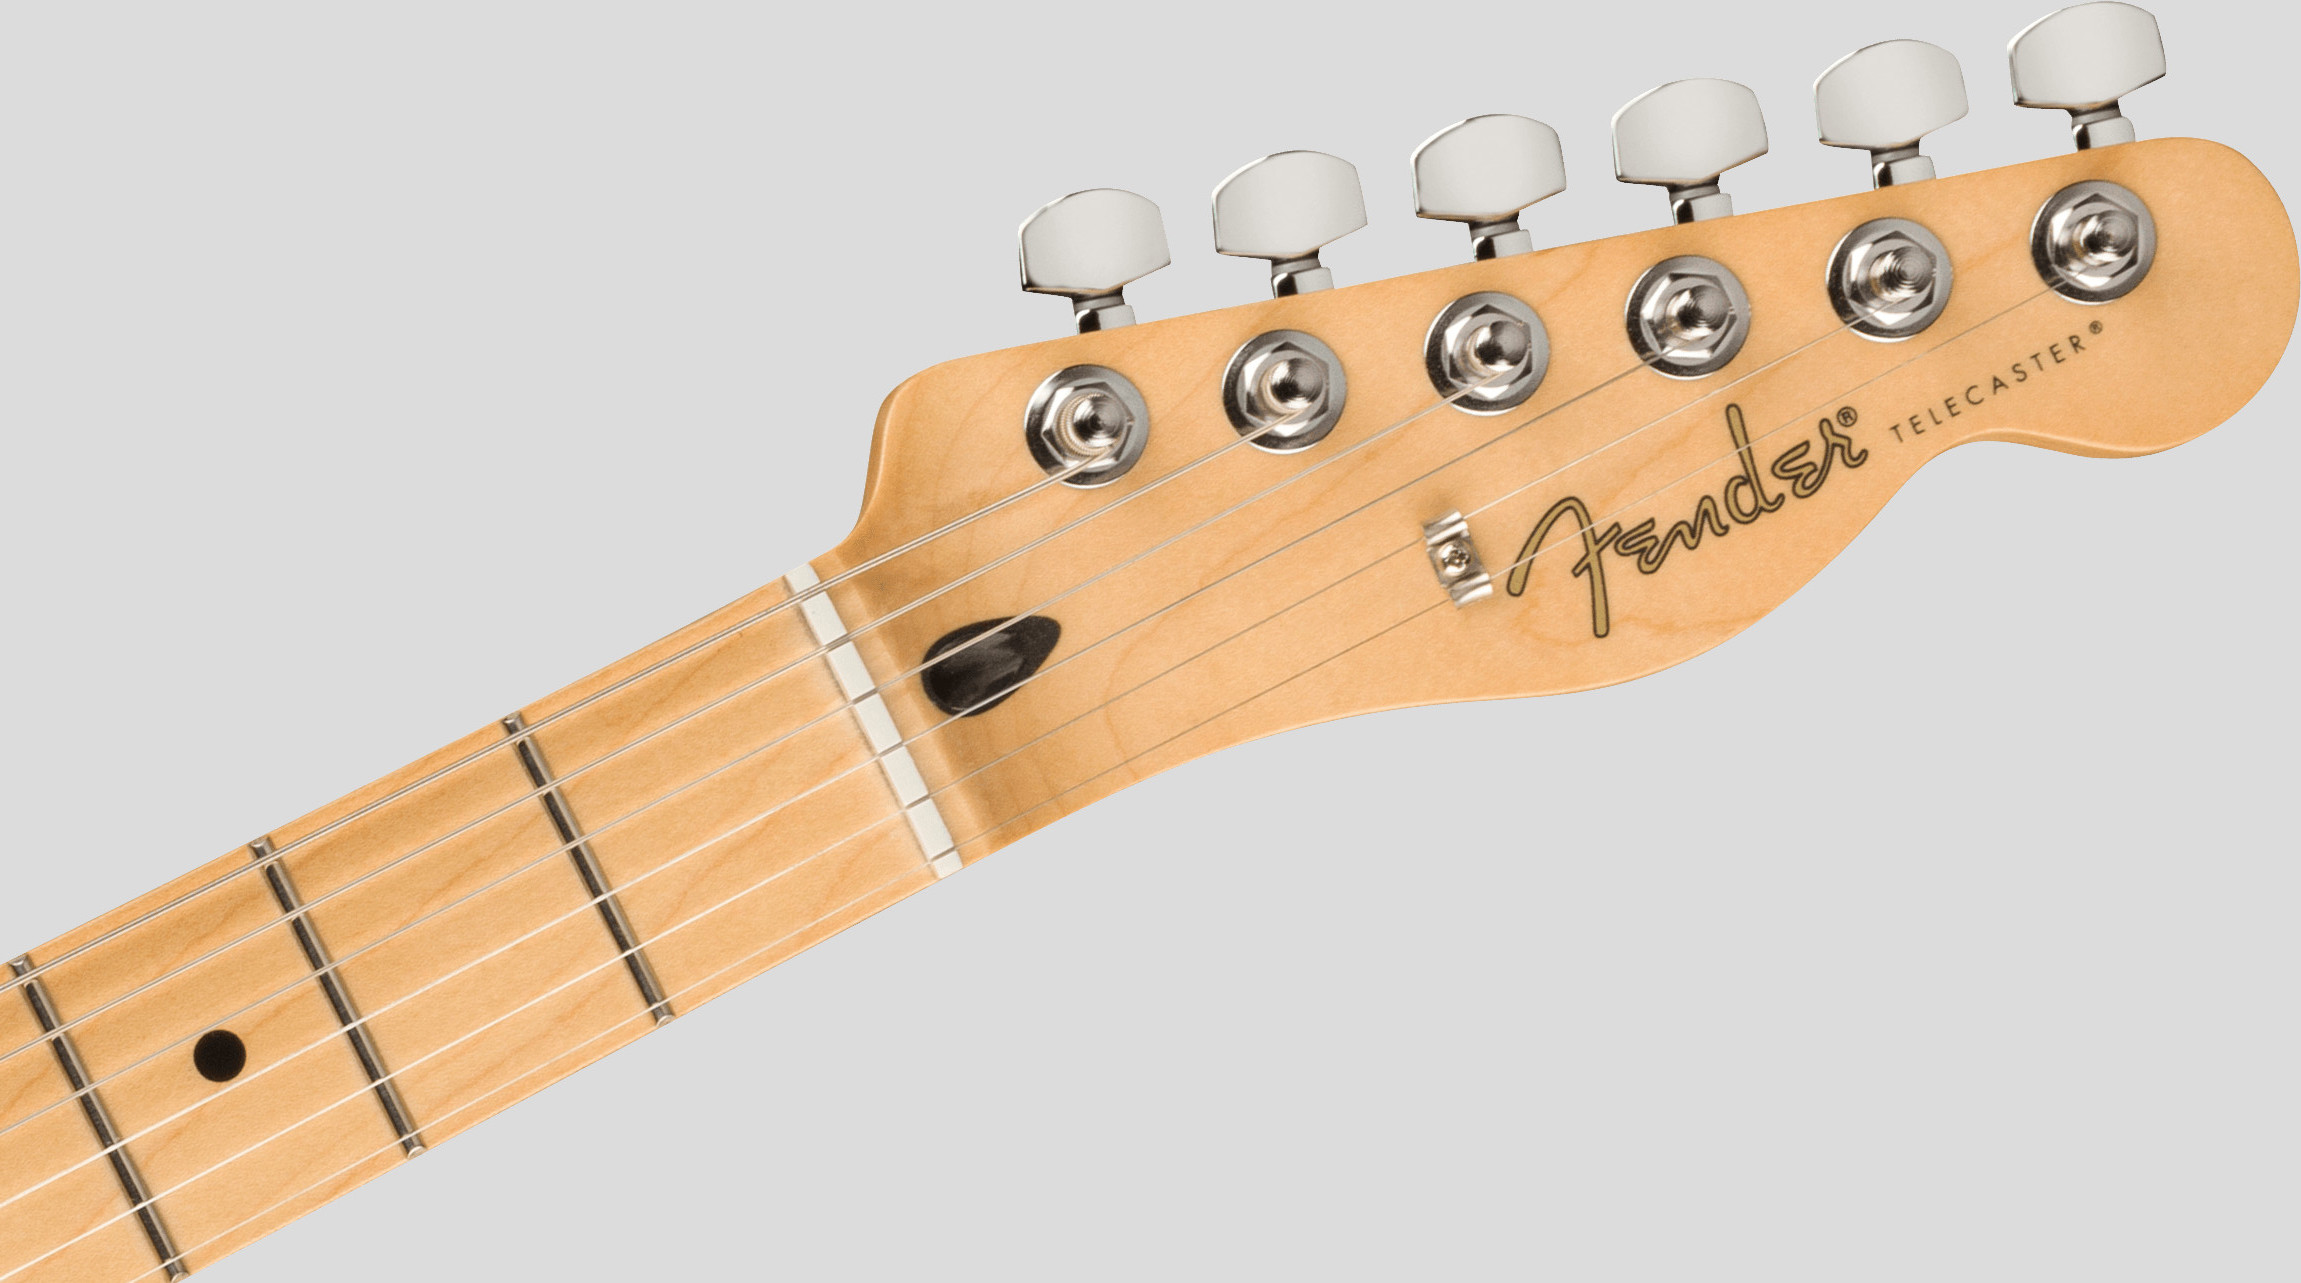 Fender Limited Edition Player Telecaster Pacific Peach 5